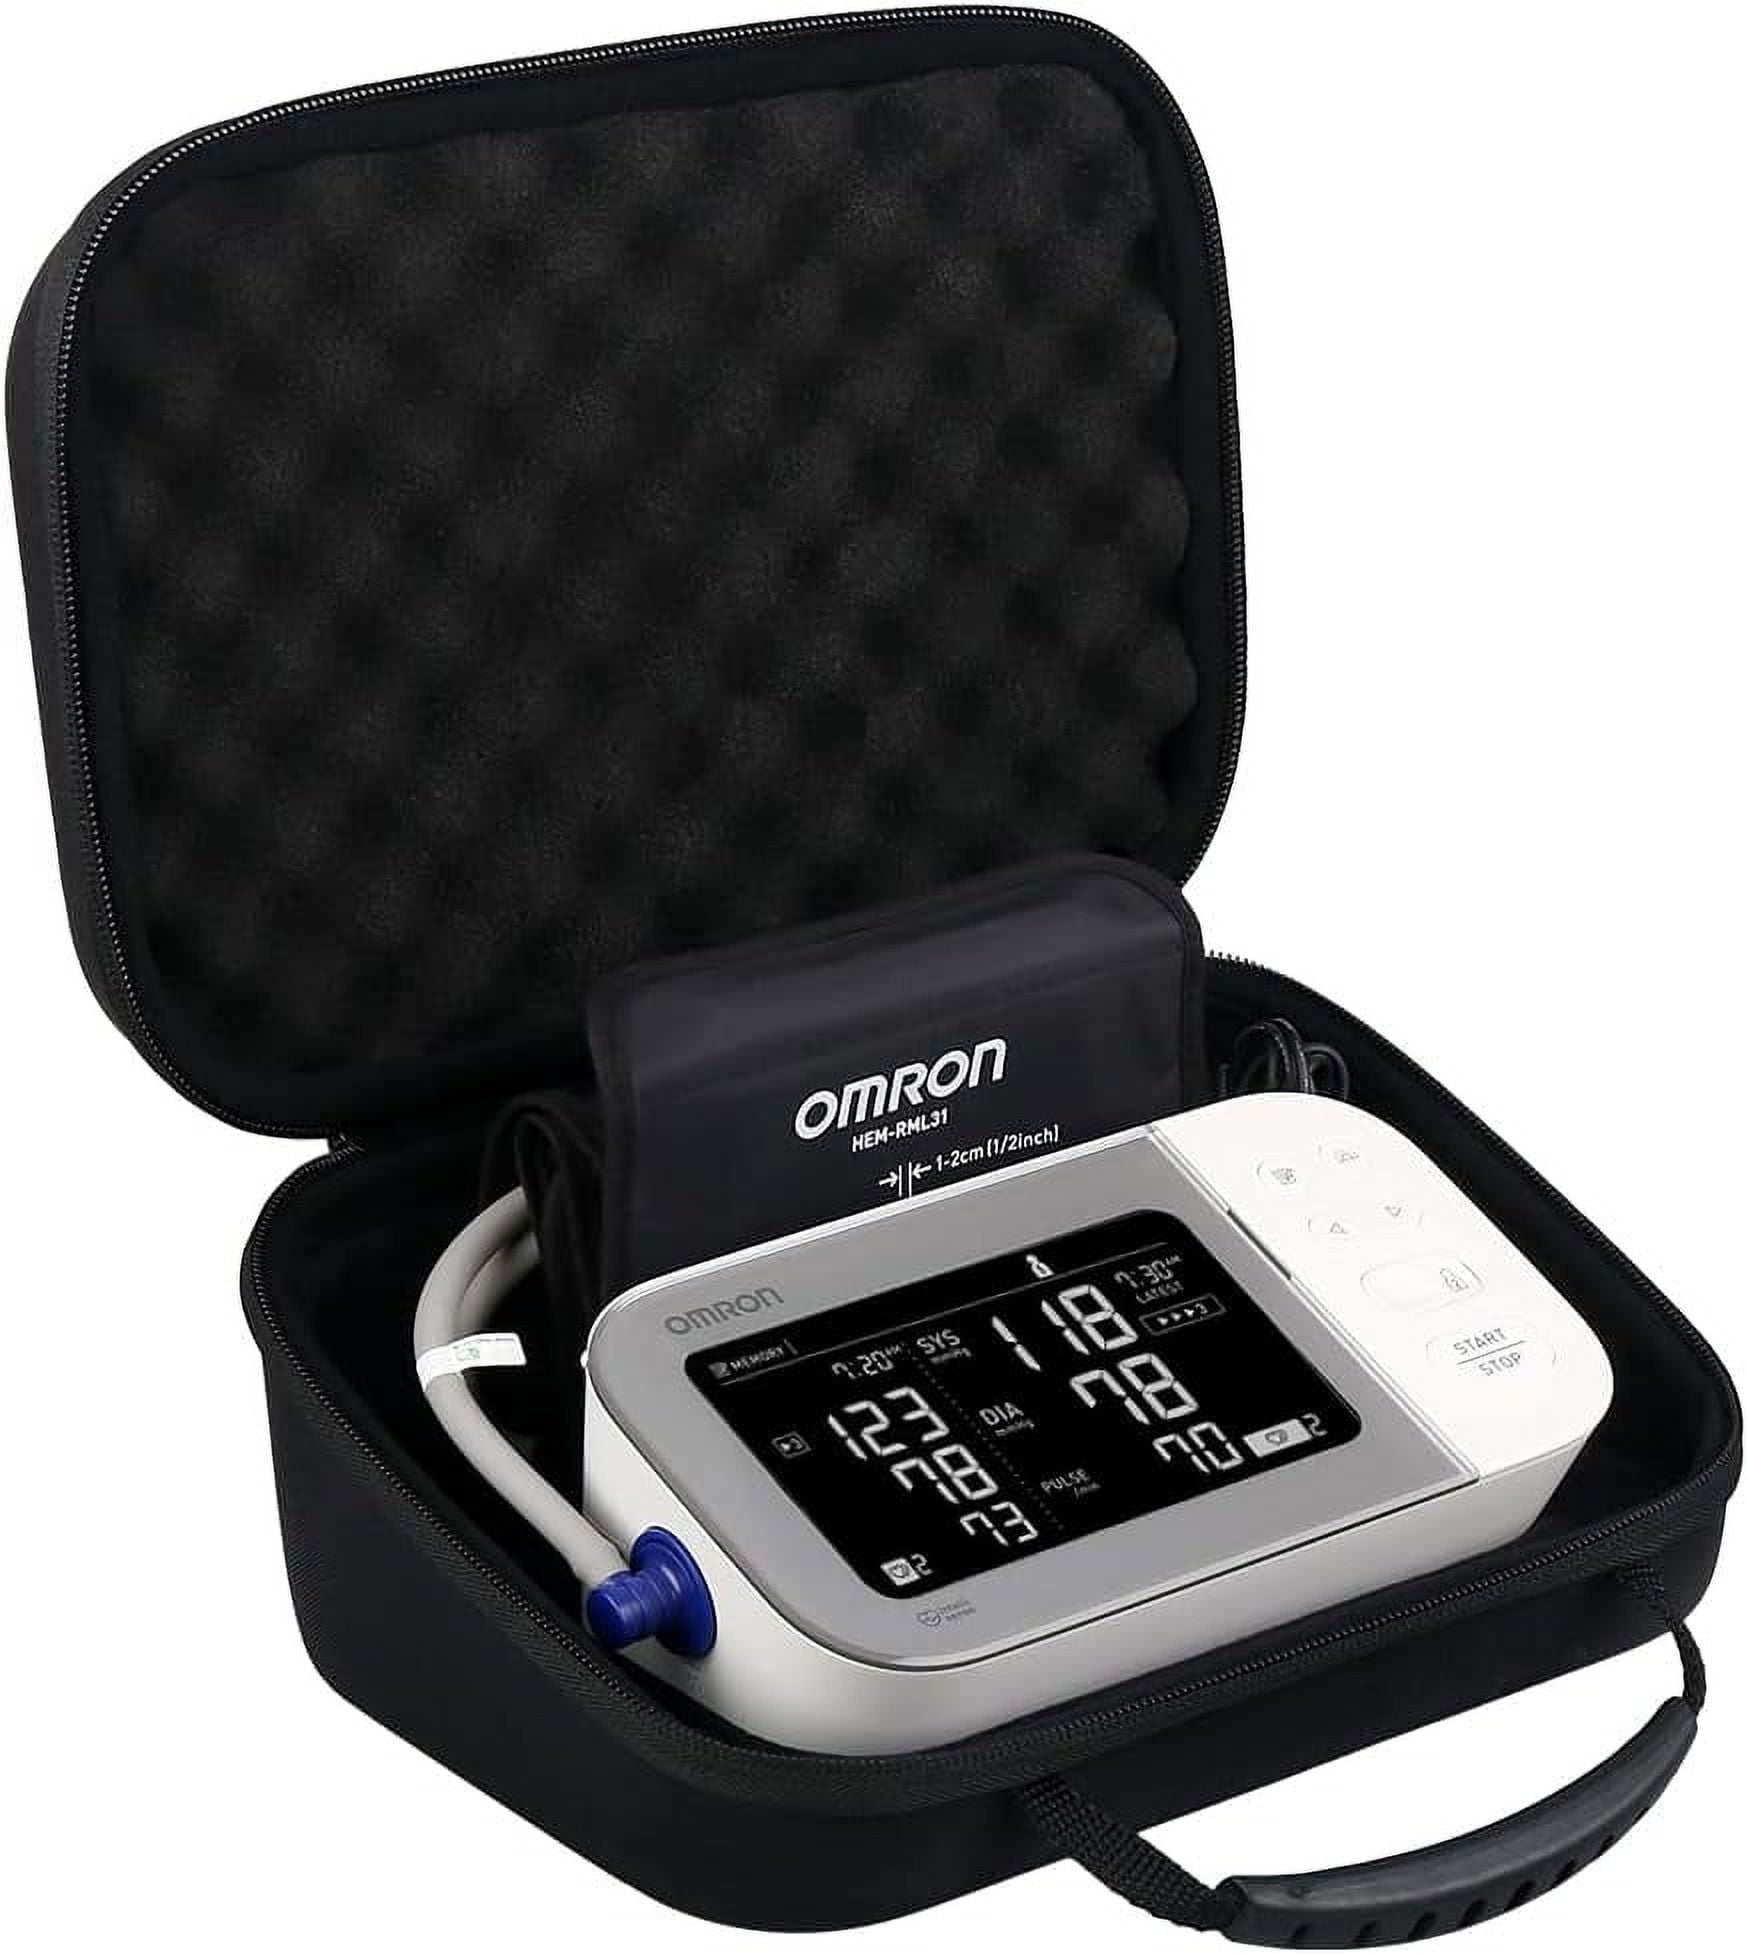 Caseling Hard Case Fits Omron 5 Series Upper Arm Blood Pressure Monitor  with Cuff (BP742N) Carrying Storage Travel Bag Protective Pouch to Protect